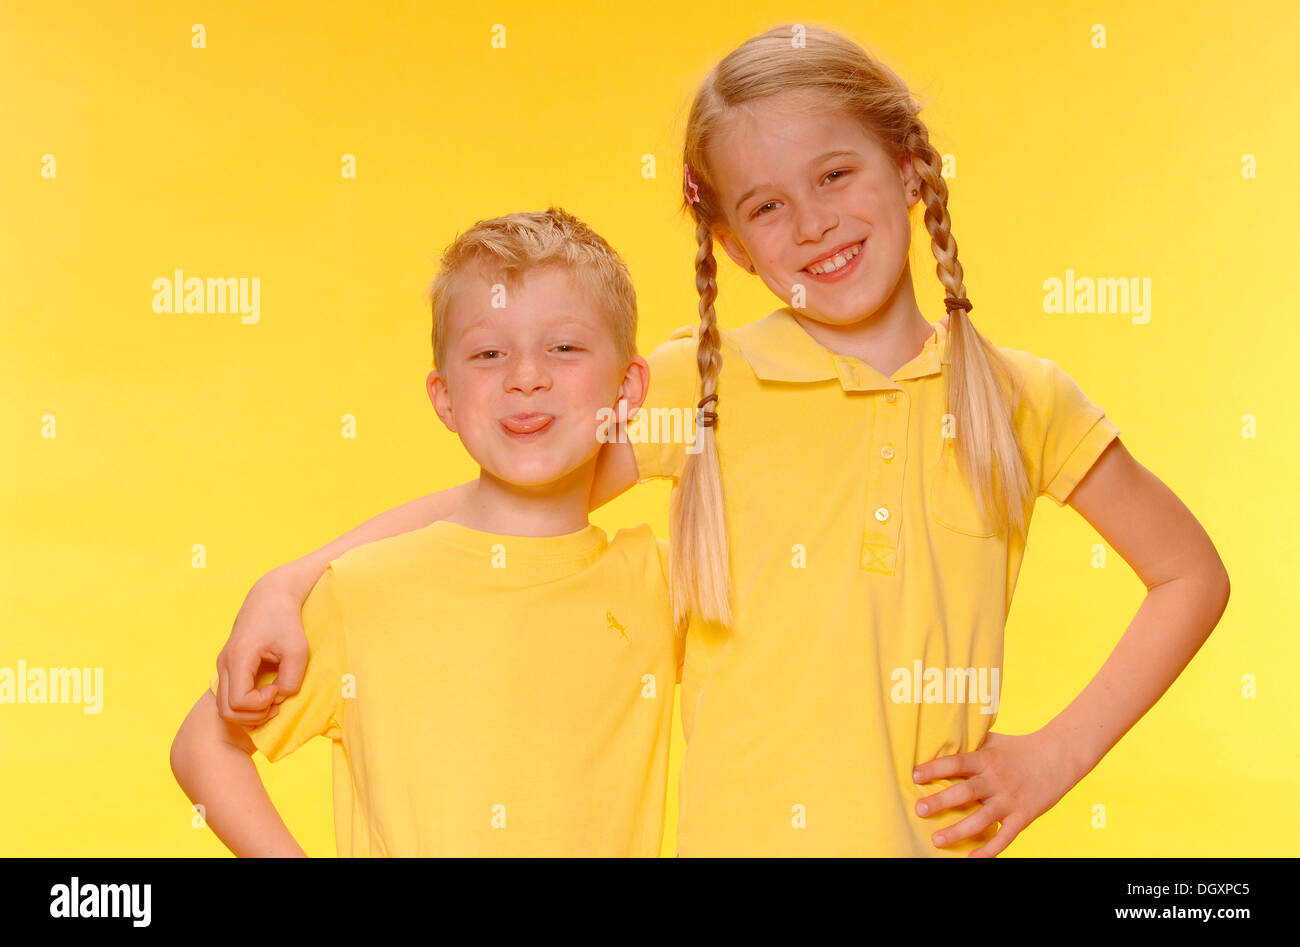 Boy and girl, brother and sister, standing arm in arm, smiling Stock Photo